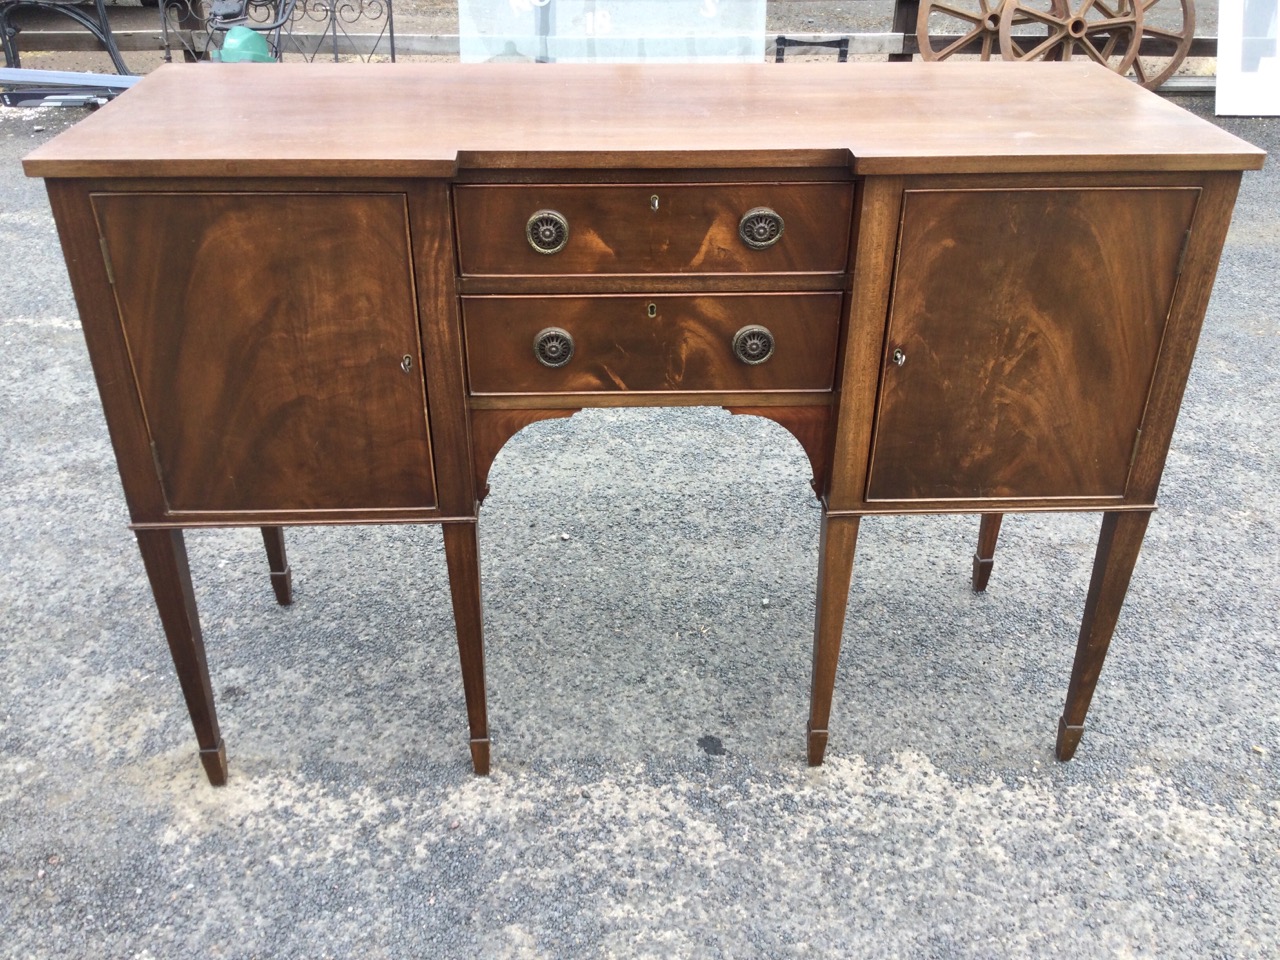 A Georgian style breakfront mahogany sideboard with two central cockbeaded drawers flanked by - Image 2 of 3